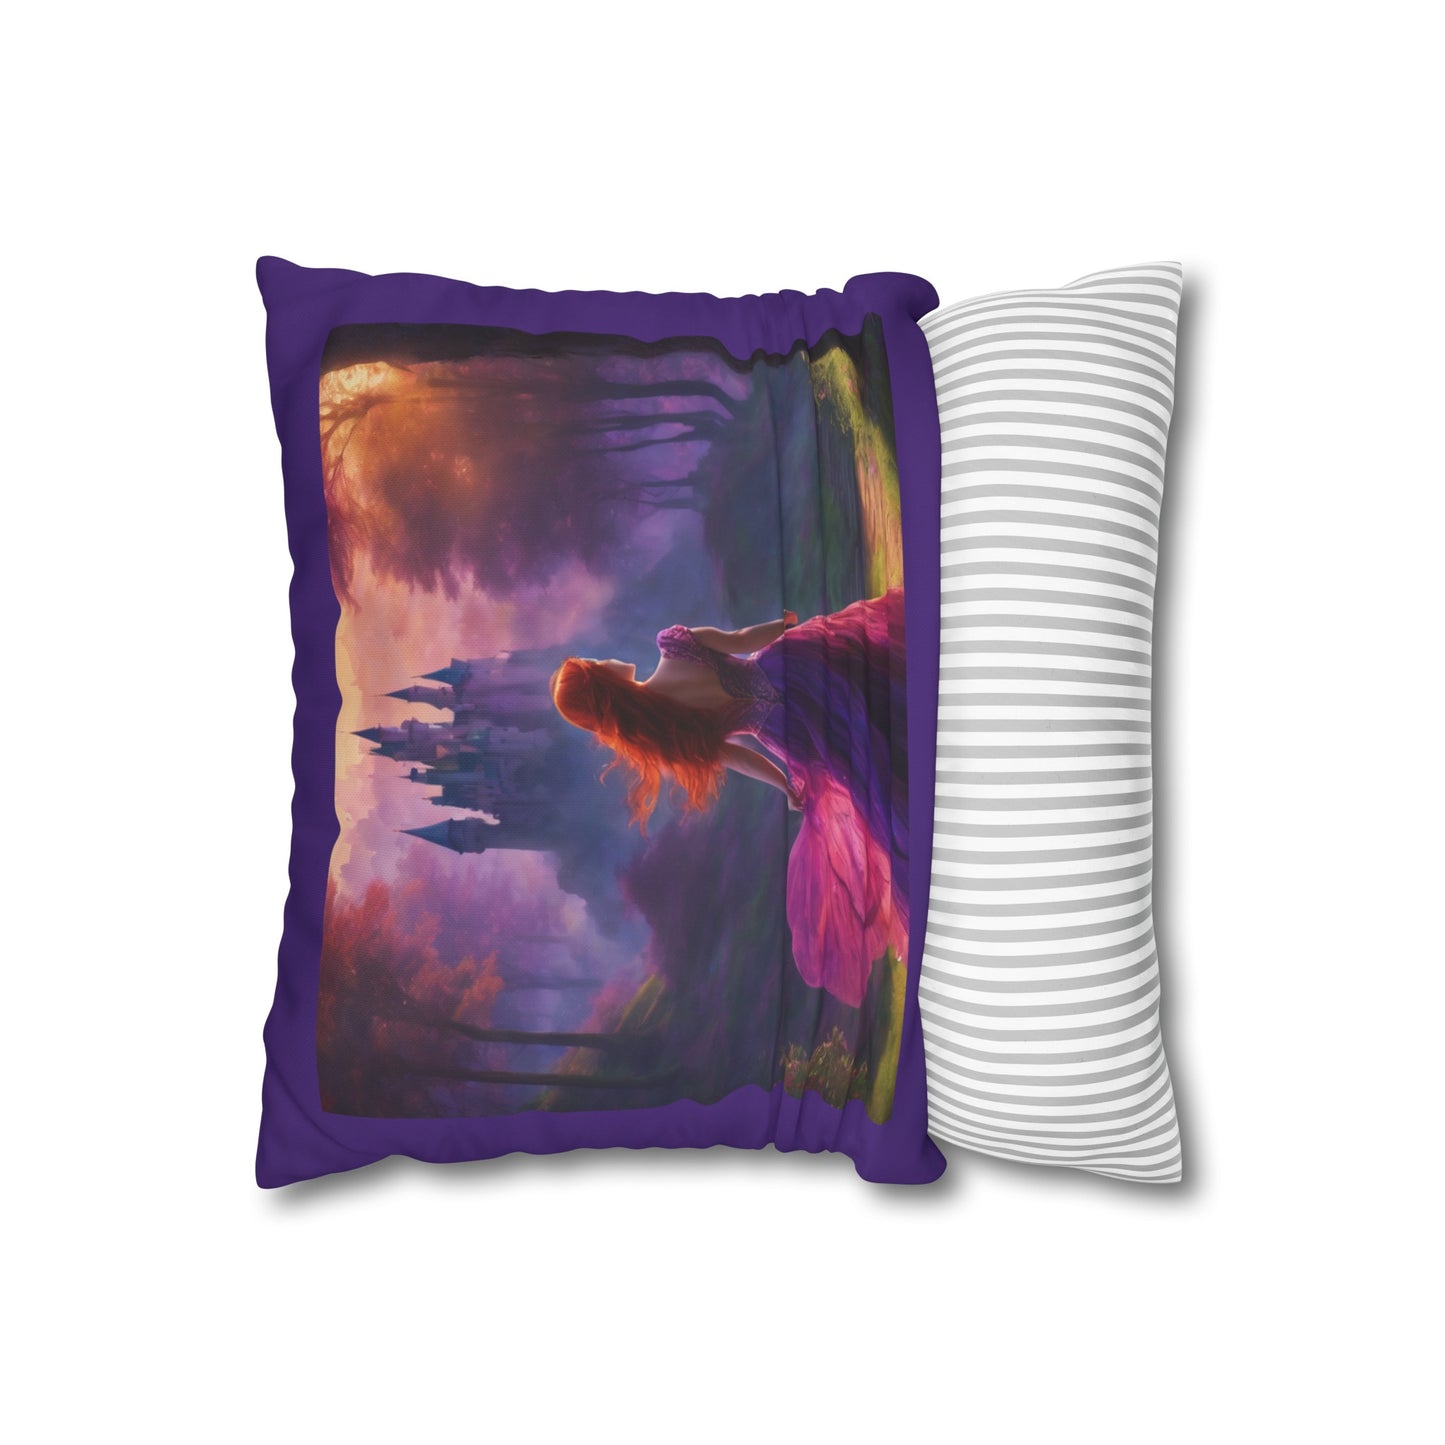 Once Upon A Fantasy #1 Cushion Cover - Purple